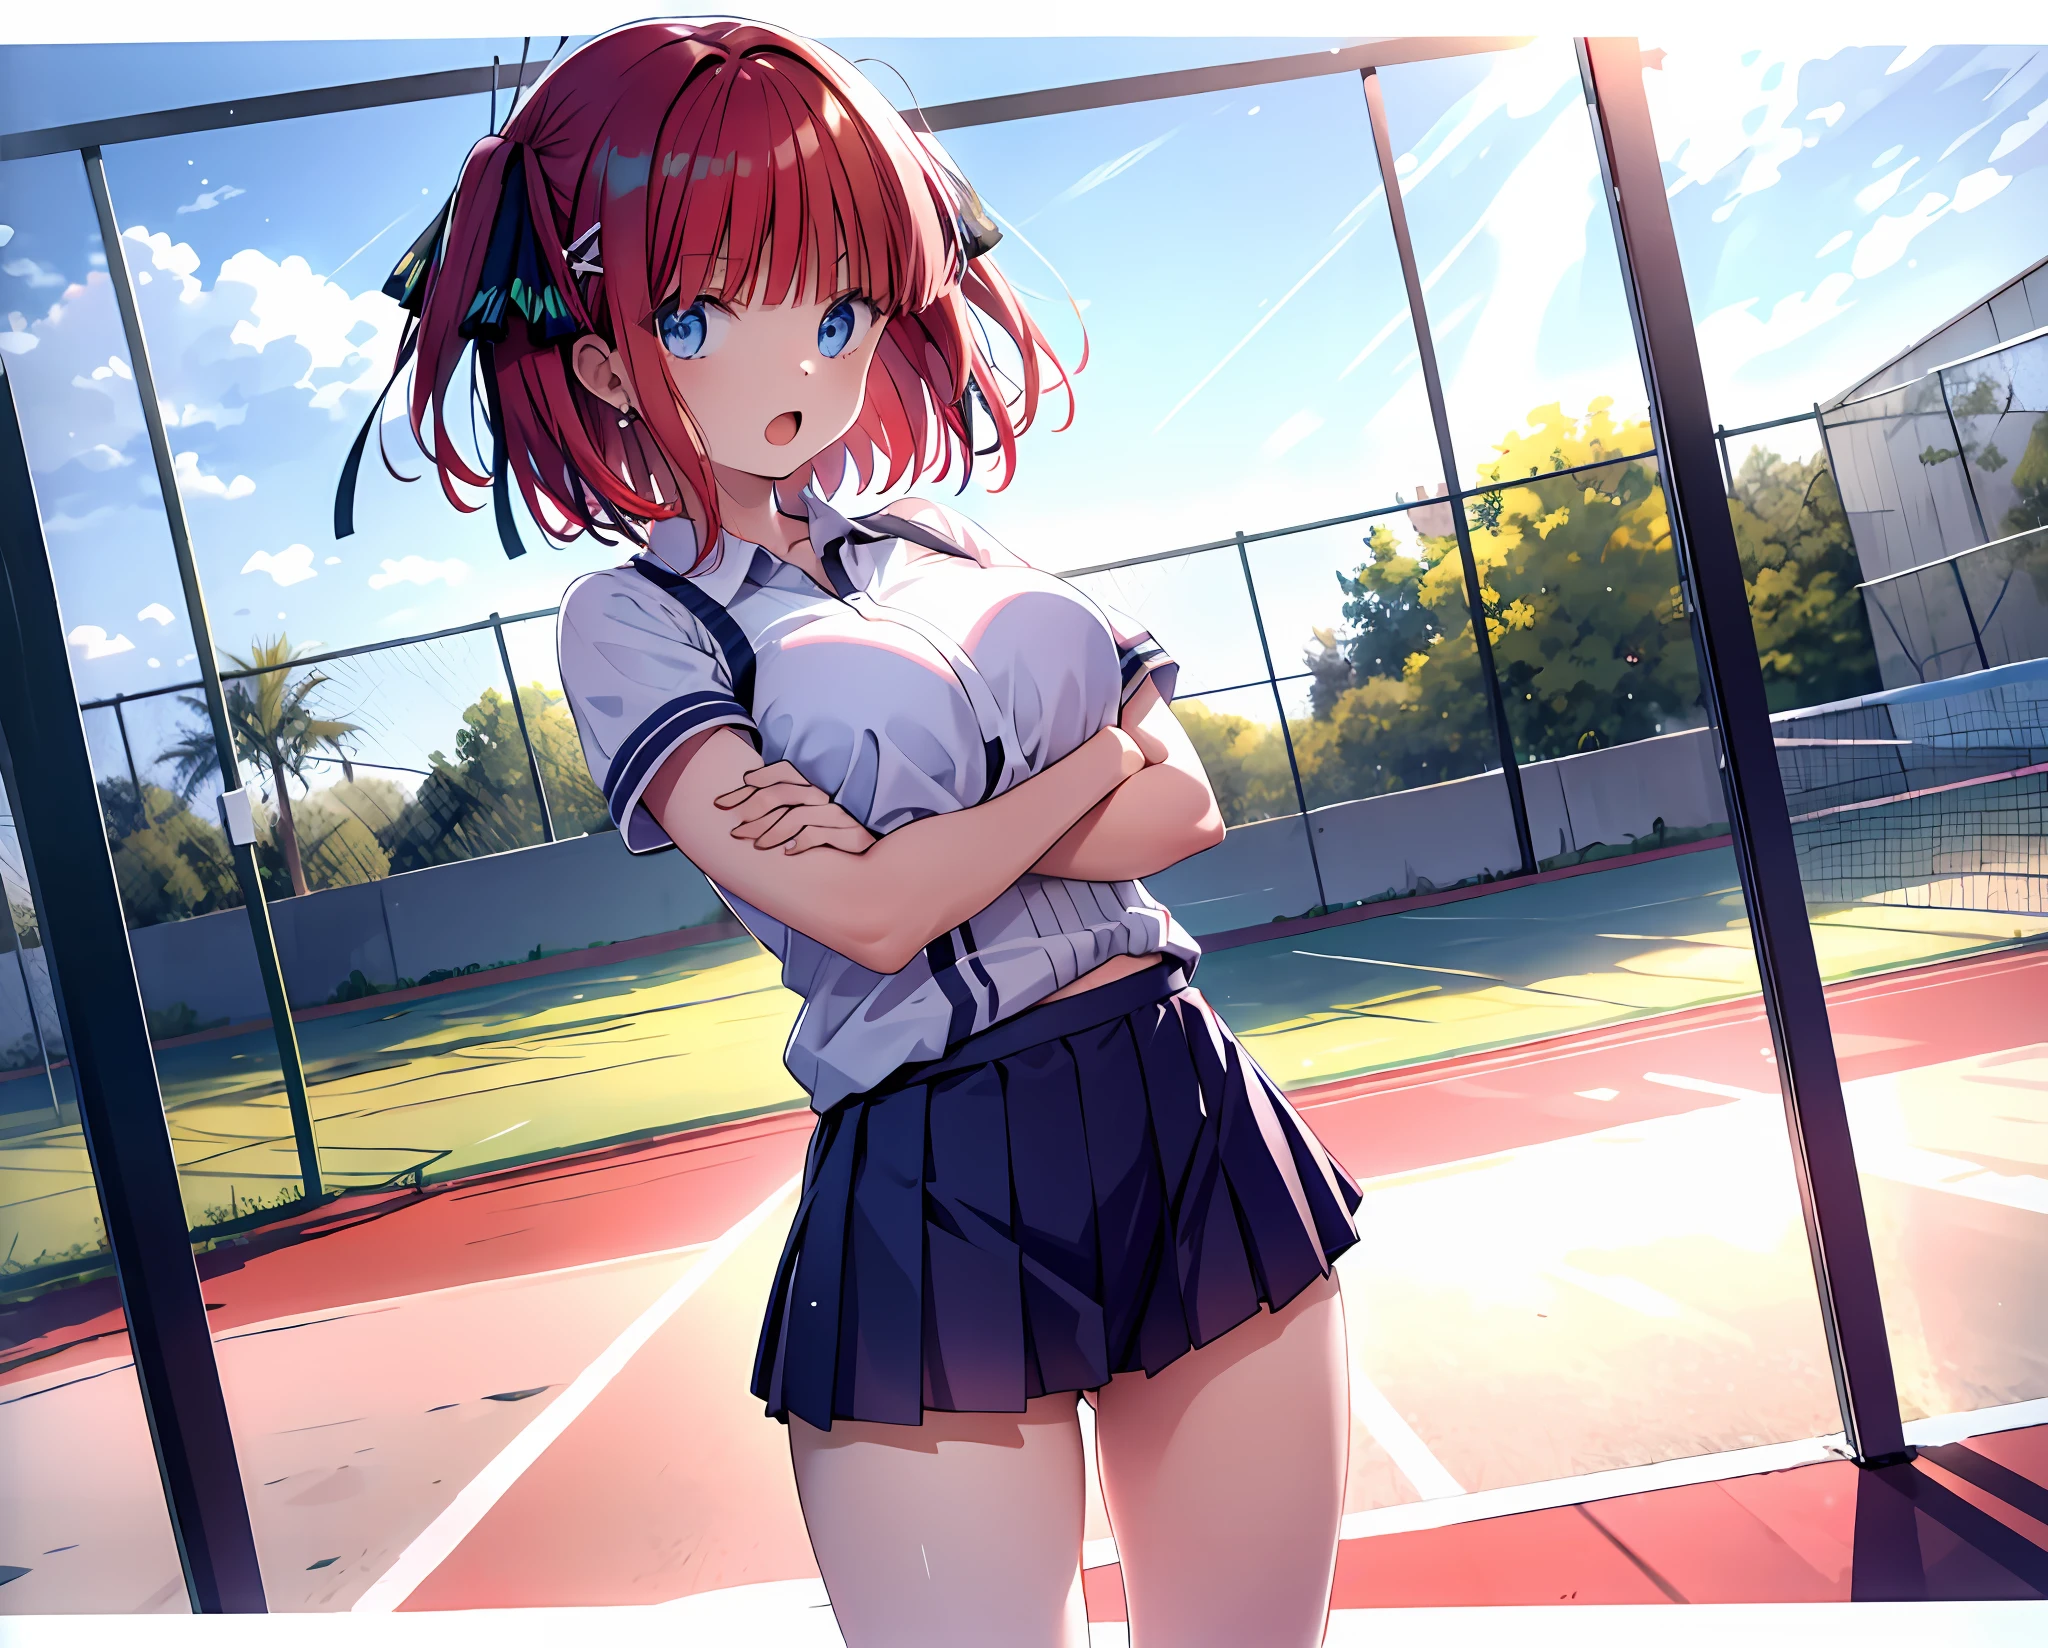 absurdres, highres,
BREAK
looking at viewer, cowboy shot, (from front:1.5)
BREAK
(vivid-color:1.3)
BREAK
(one girl:1.3), (loli:1.2),red hair, blue eyes, tennis uniform, hairclip, earrings, jewelry, nm1,  hair ribbon, short hair, tennis cosplay, (pleated super short skirt:1.4), (thighs:1.3), (large ass:1.3), large breasts, (provocative face:1.3), open mouth, (folding one's arms:1.3), (breast:1.3), ass, round eyes, (blowing in the wind:0.5), sweat around girl, dripping sweat, squall (wind:1.2), sense of speed, refreshing breeze, motion blur effect, wind, (no pants visible:1.4)
BREAK
background is (tennis court:1.3), (Stand in the center of the screen:1.3), (10,000 people spectators:1.3), multiple people behind you, blue sky with clouds, outdoors, (magnificent panorama view:1.2), wind
BREAK
sunlight, magnificent view, rainbow in the sky, light particles, dynamic angle, dutch angle, perspective
BREAK
(daytime, sunbeam:1.2), depth of field, bokeh, light leaks, (chromatic aberration:1.2), noon
BREAK